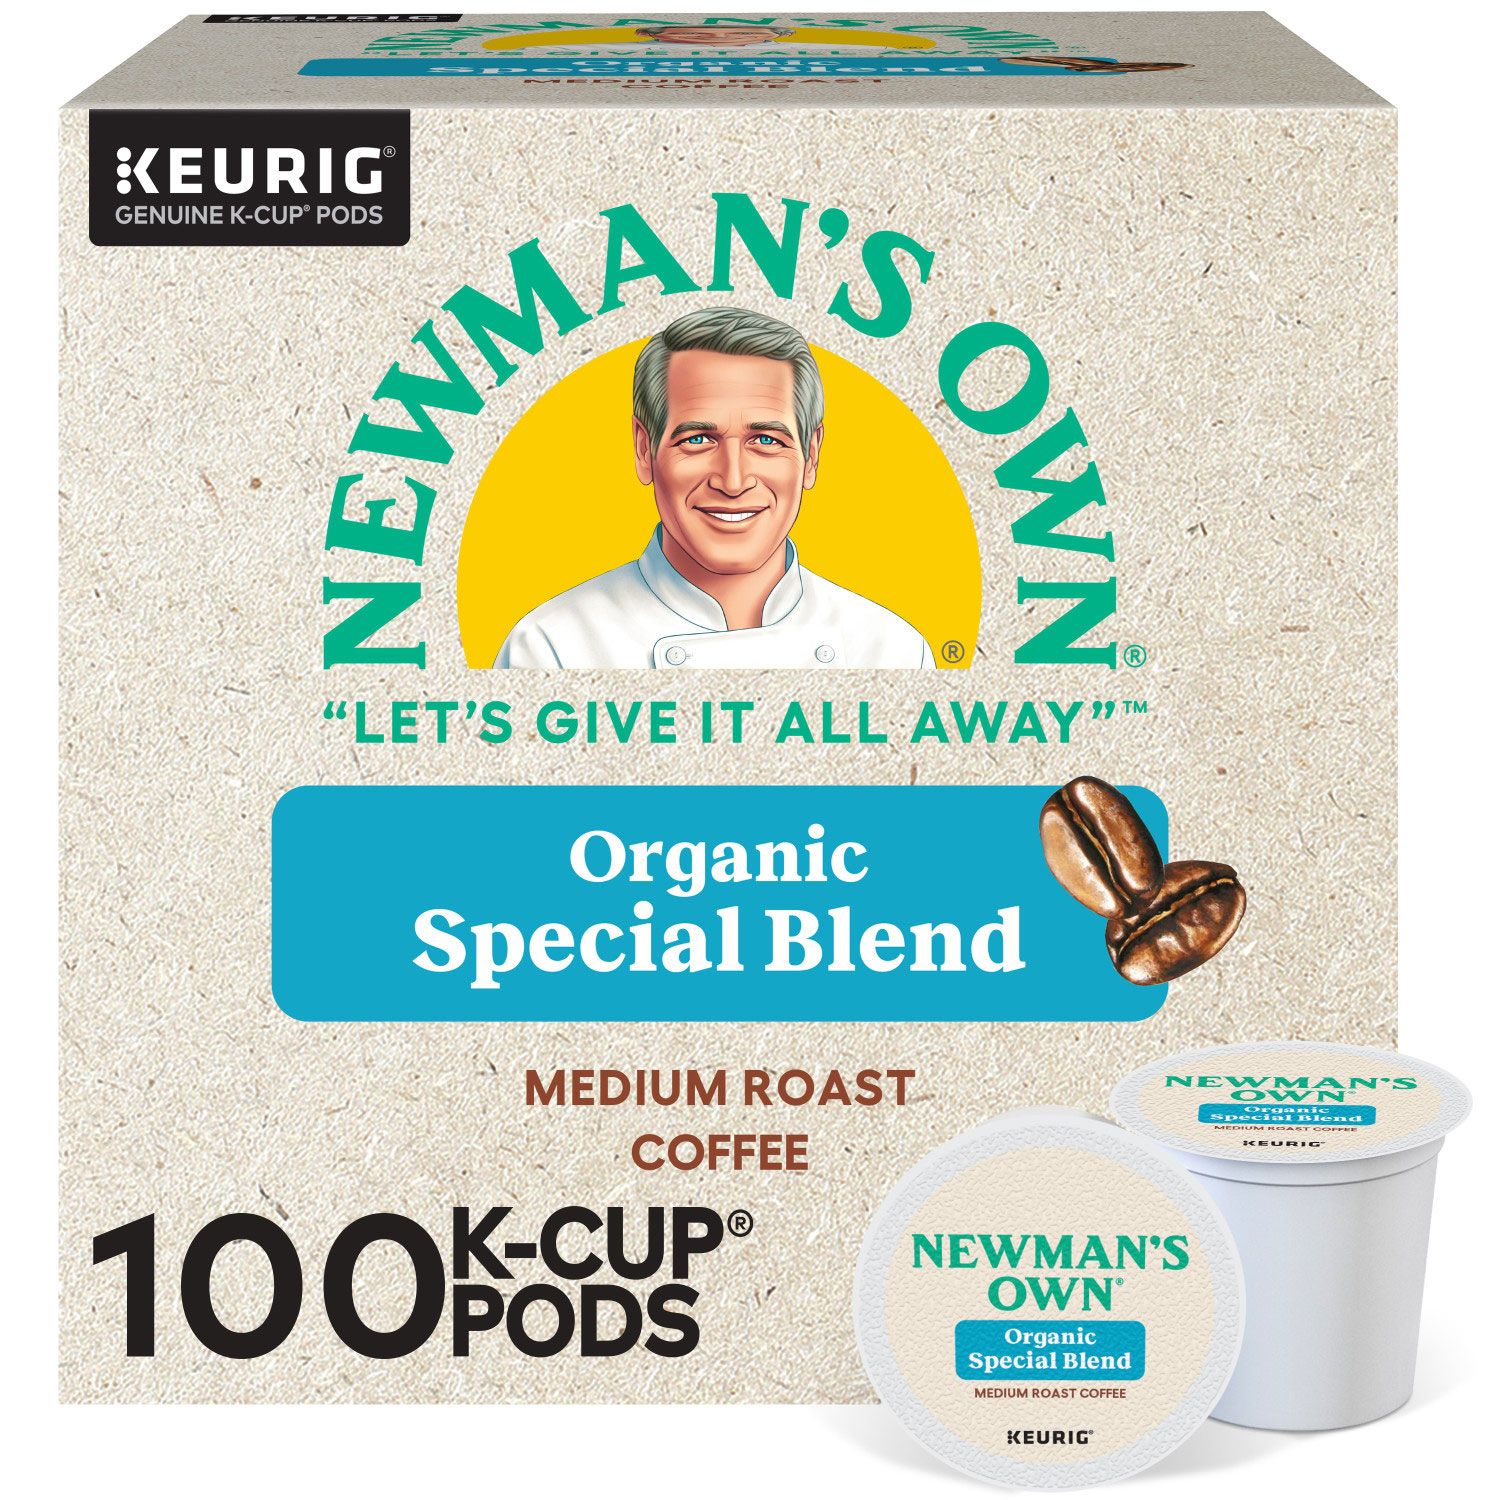 Newman’s Own Organics Special Blend Coffee (100 K-Cups)